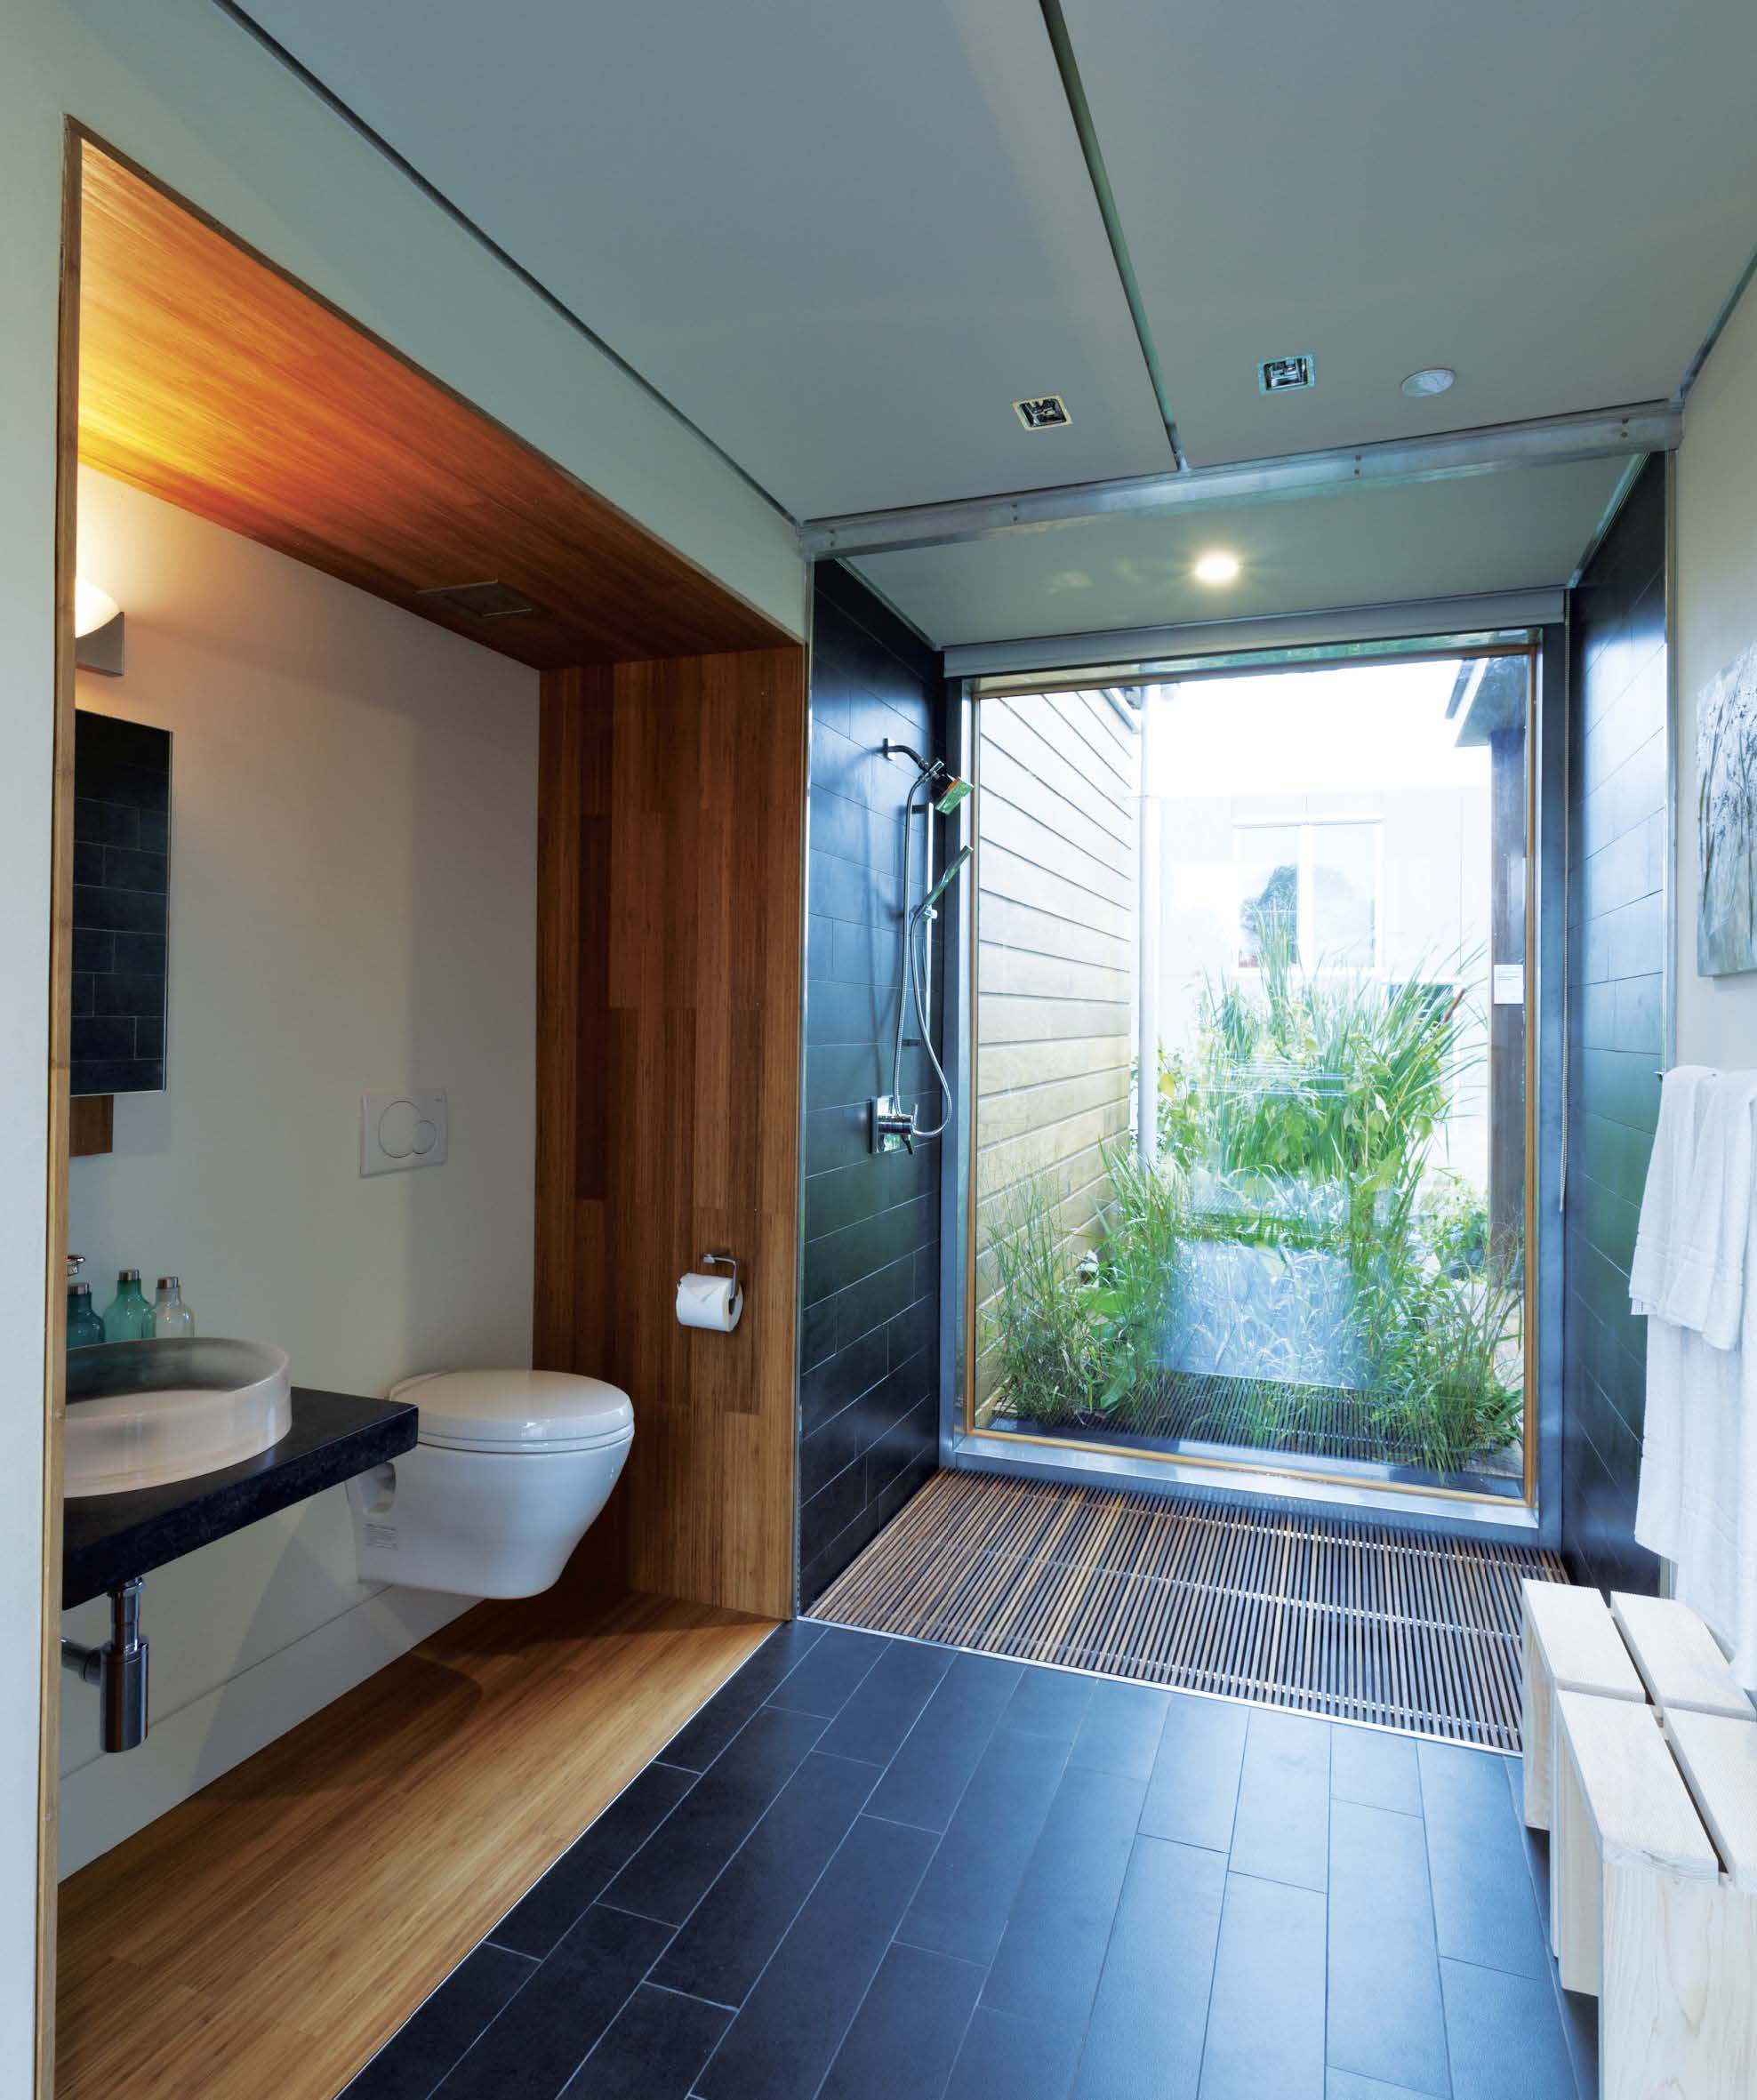 The bathroom is the focal point of the design and water conservation and reuse is a central theme to the project.